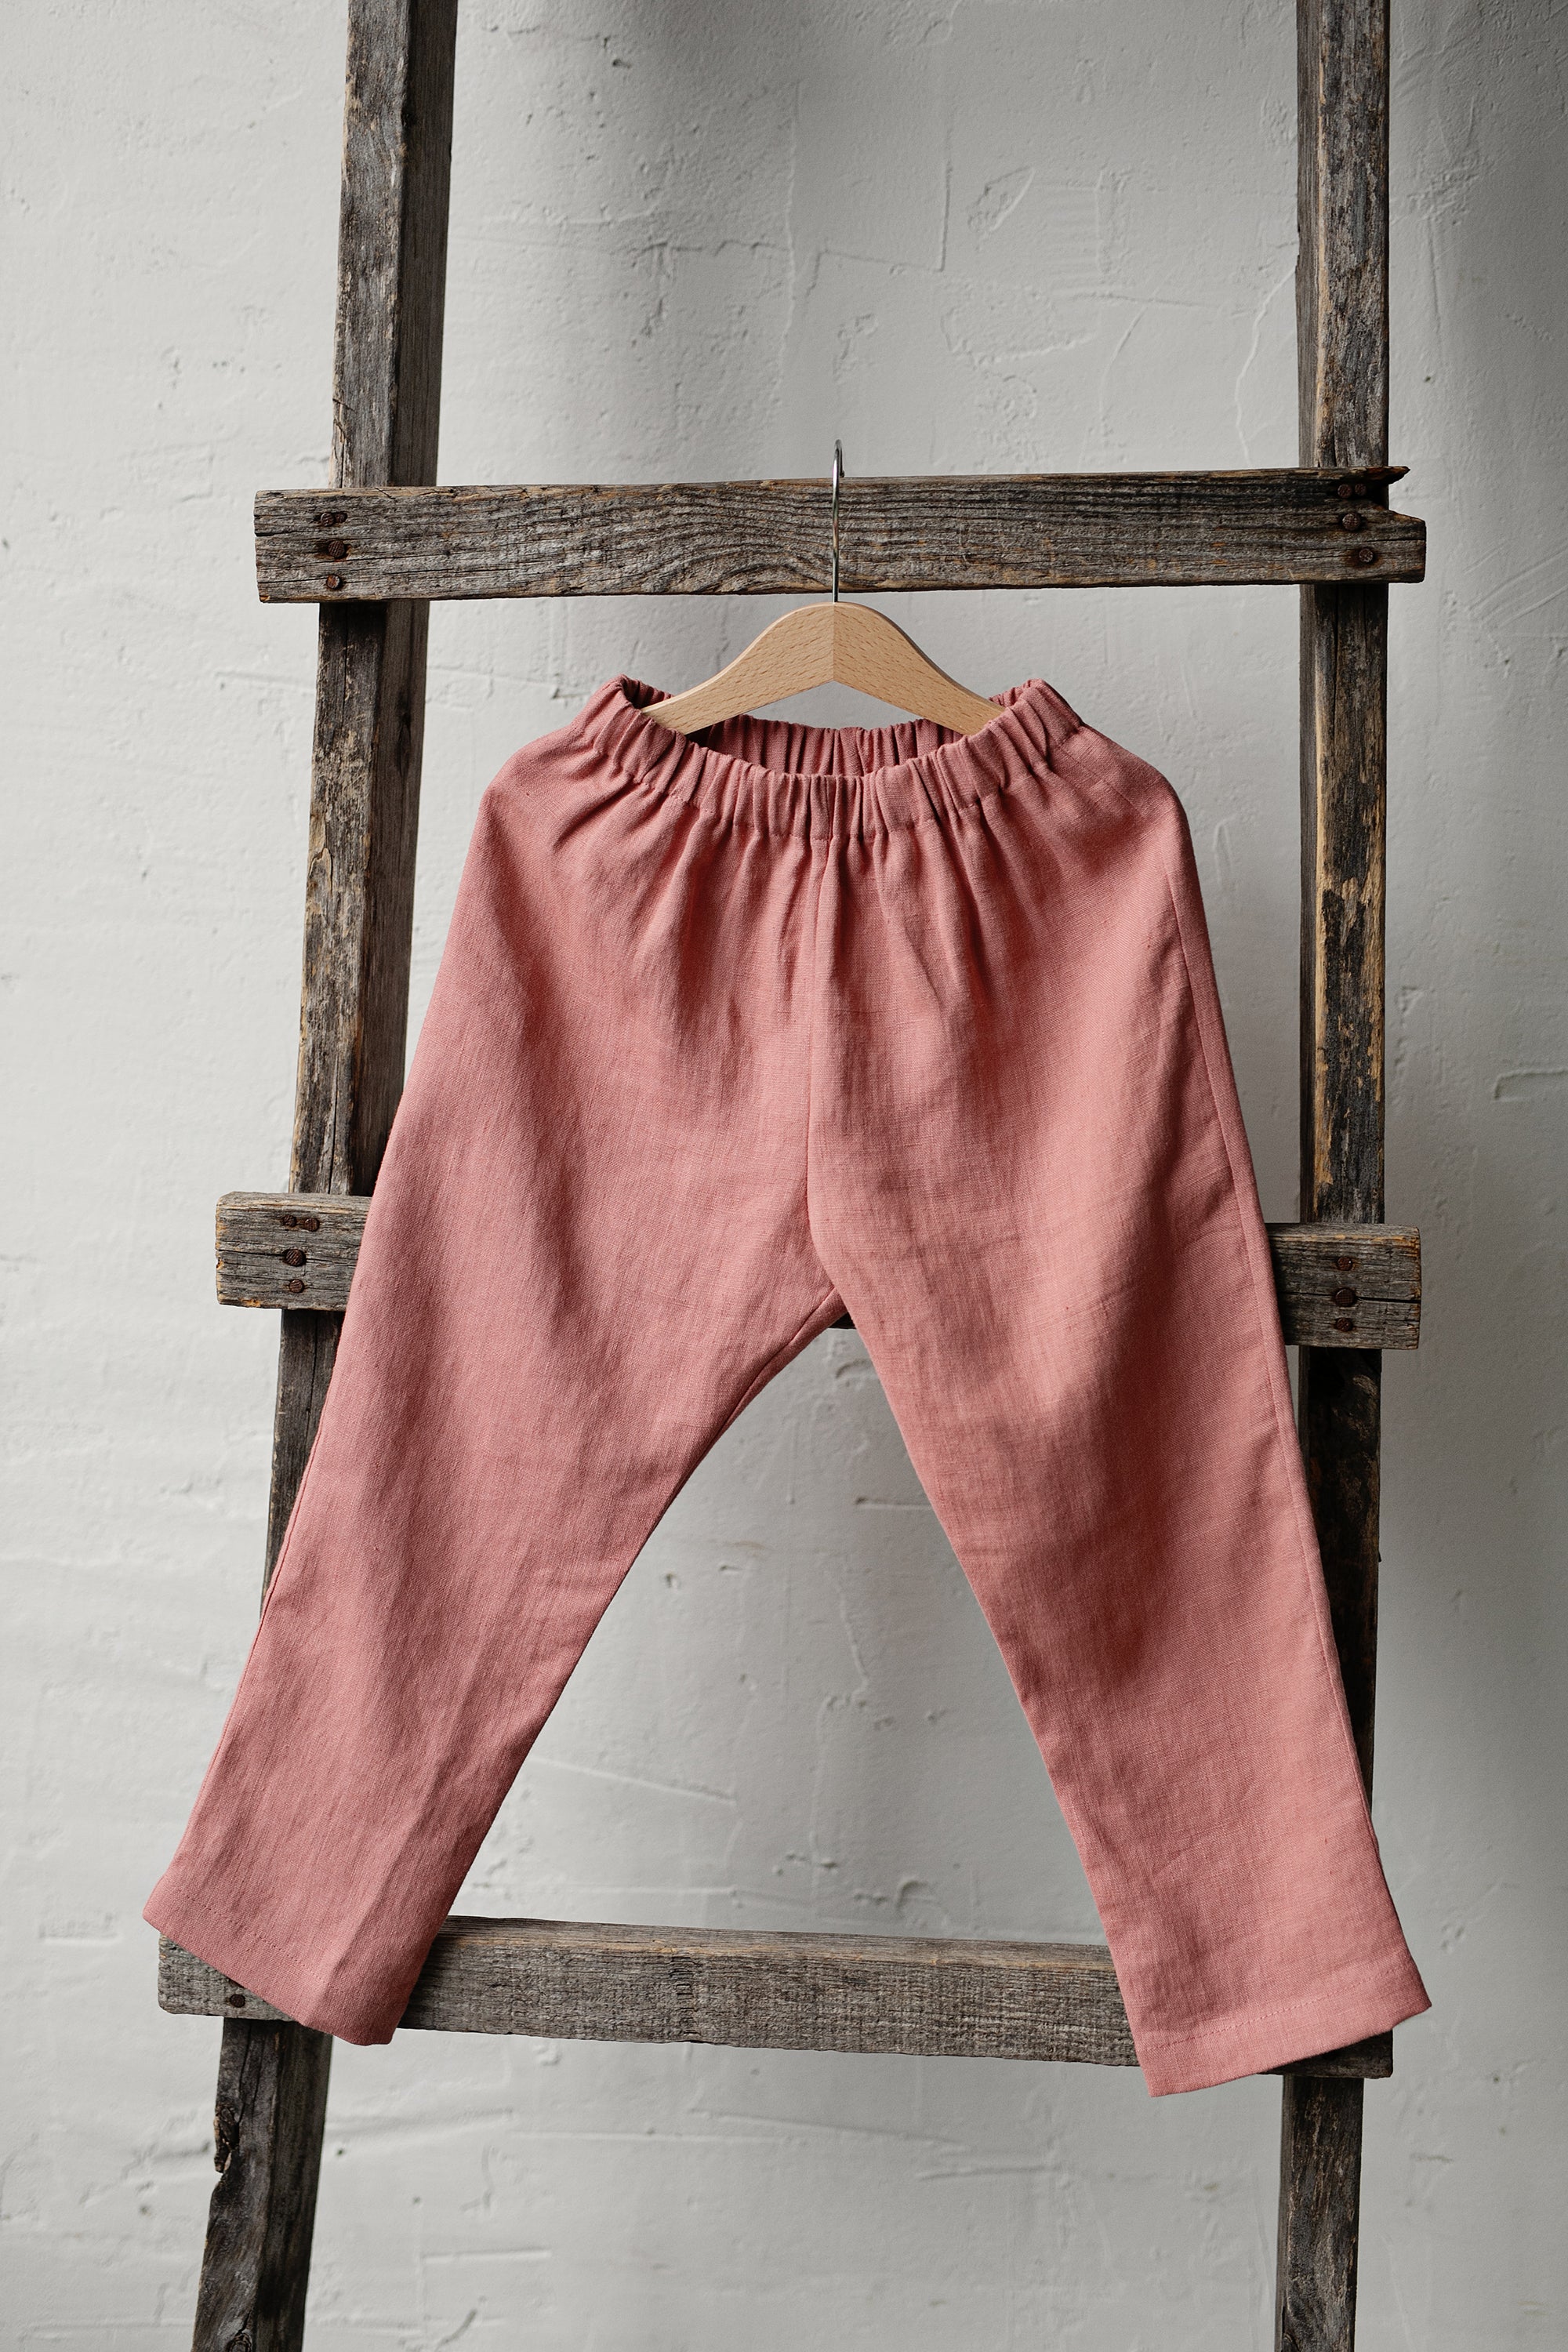 a pink pants hanging on a wooden ladder